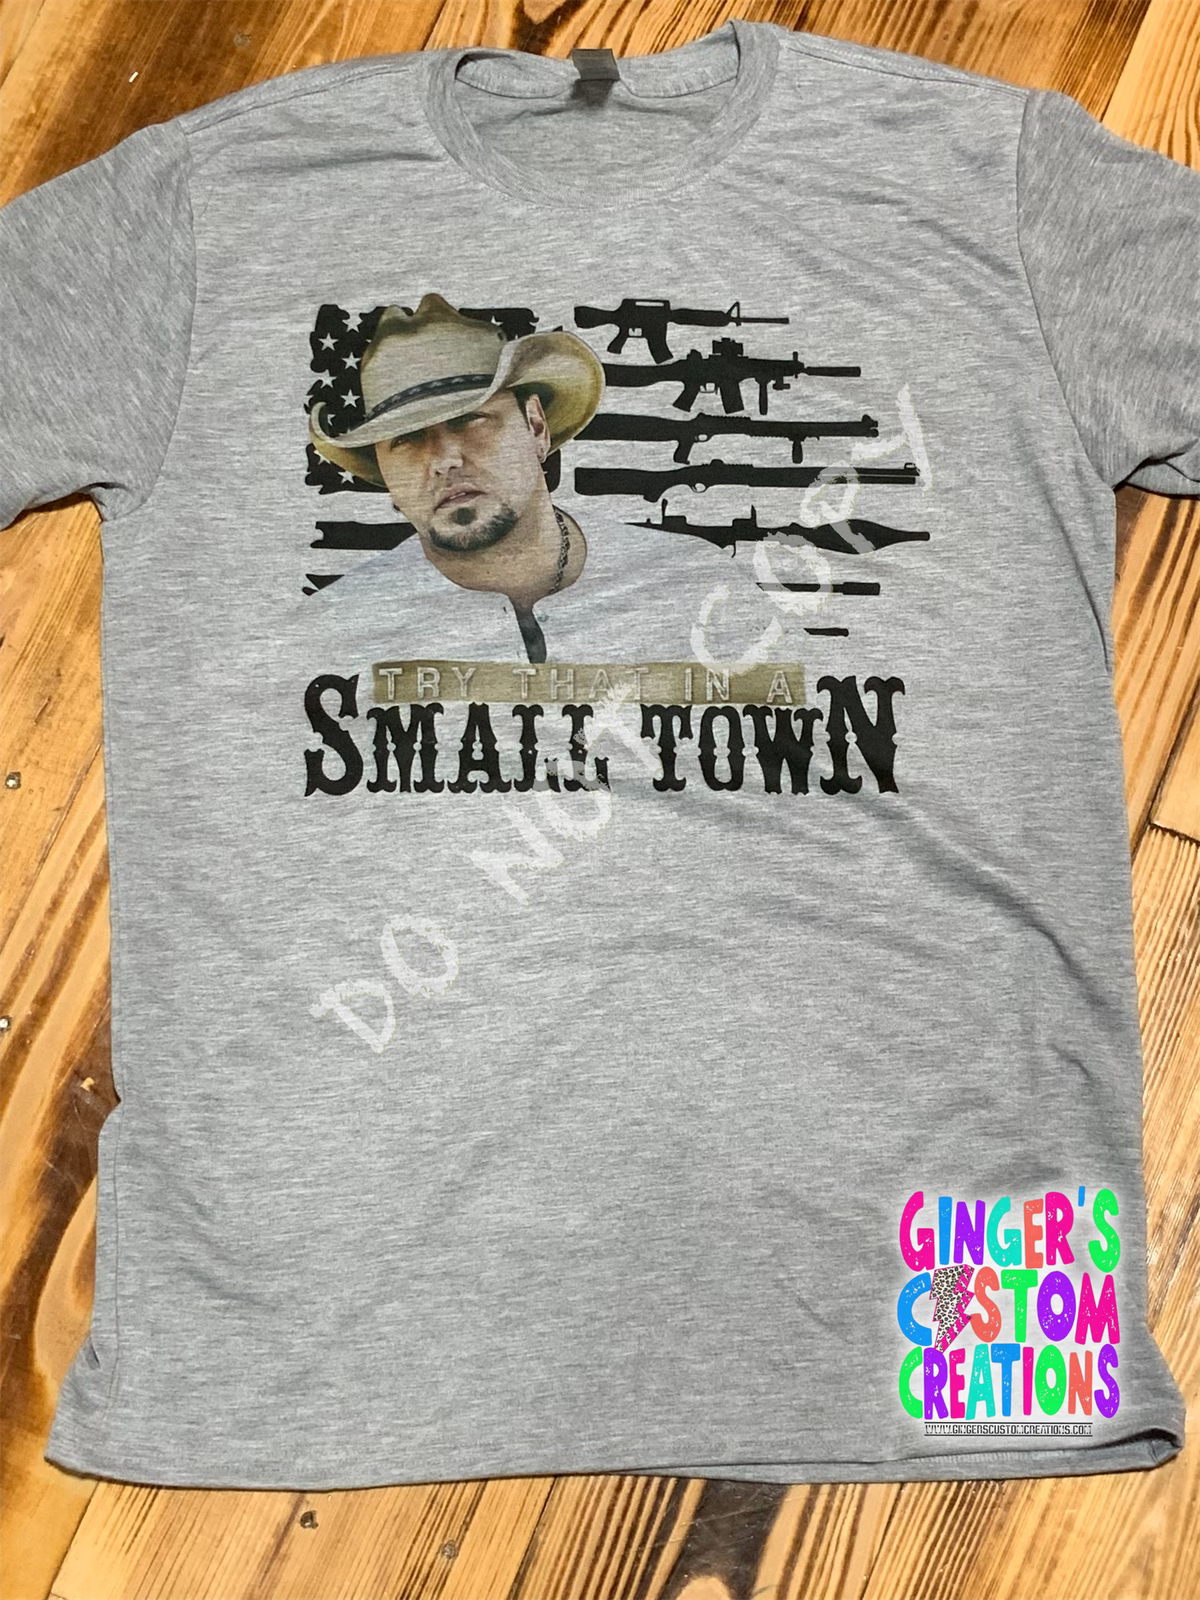 TRY THAT IN A SMALL TOWN - BLACK & TAN DESIGN - ASH GREY TSHIRT